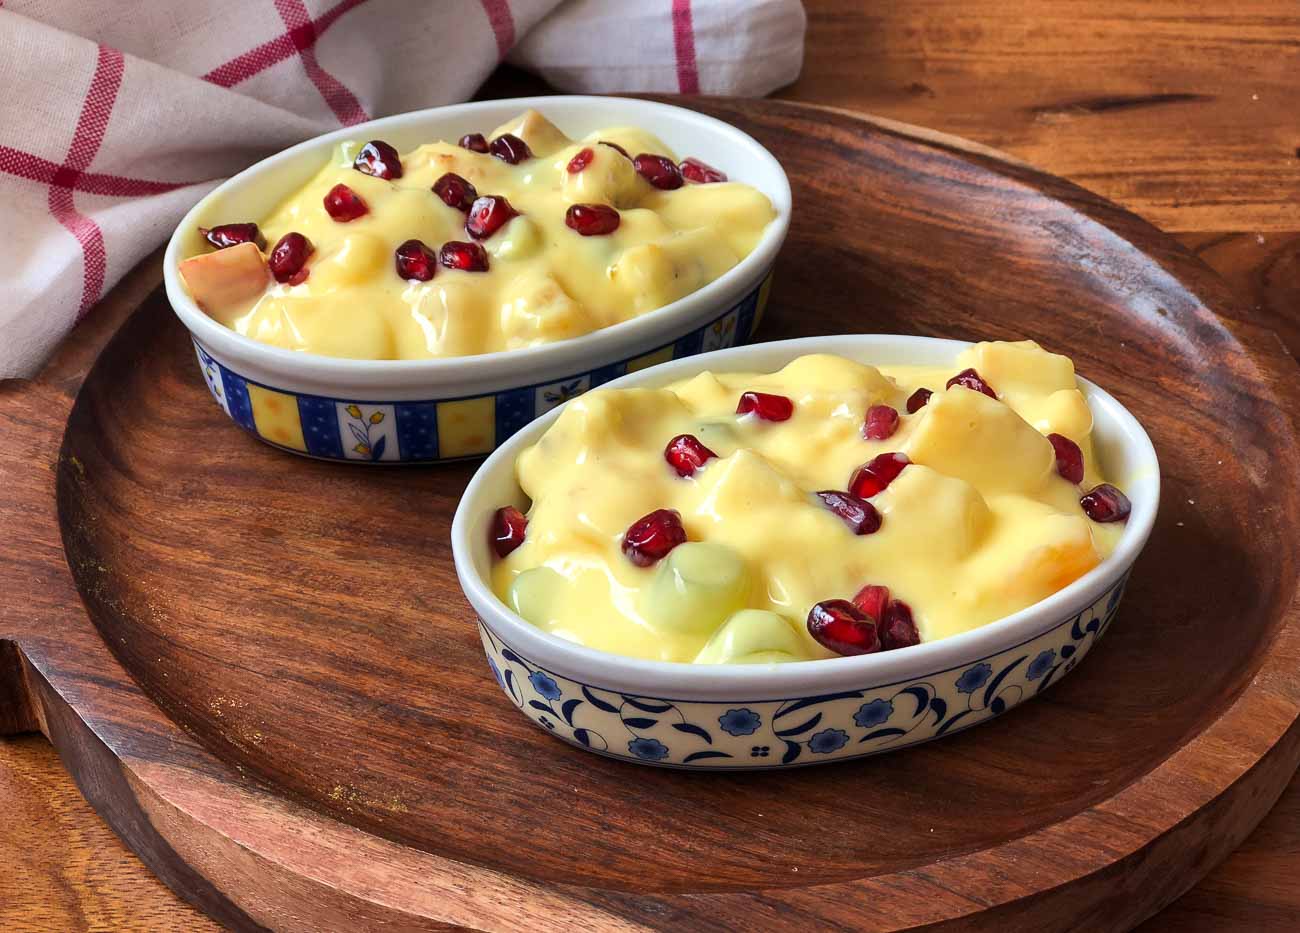 Is Andys Custard Recipe Worth Trying?